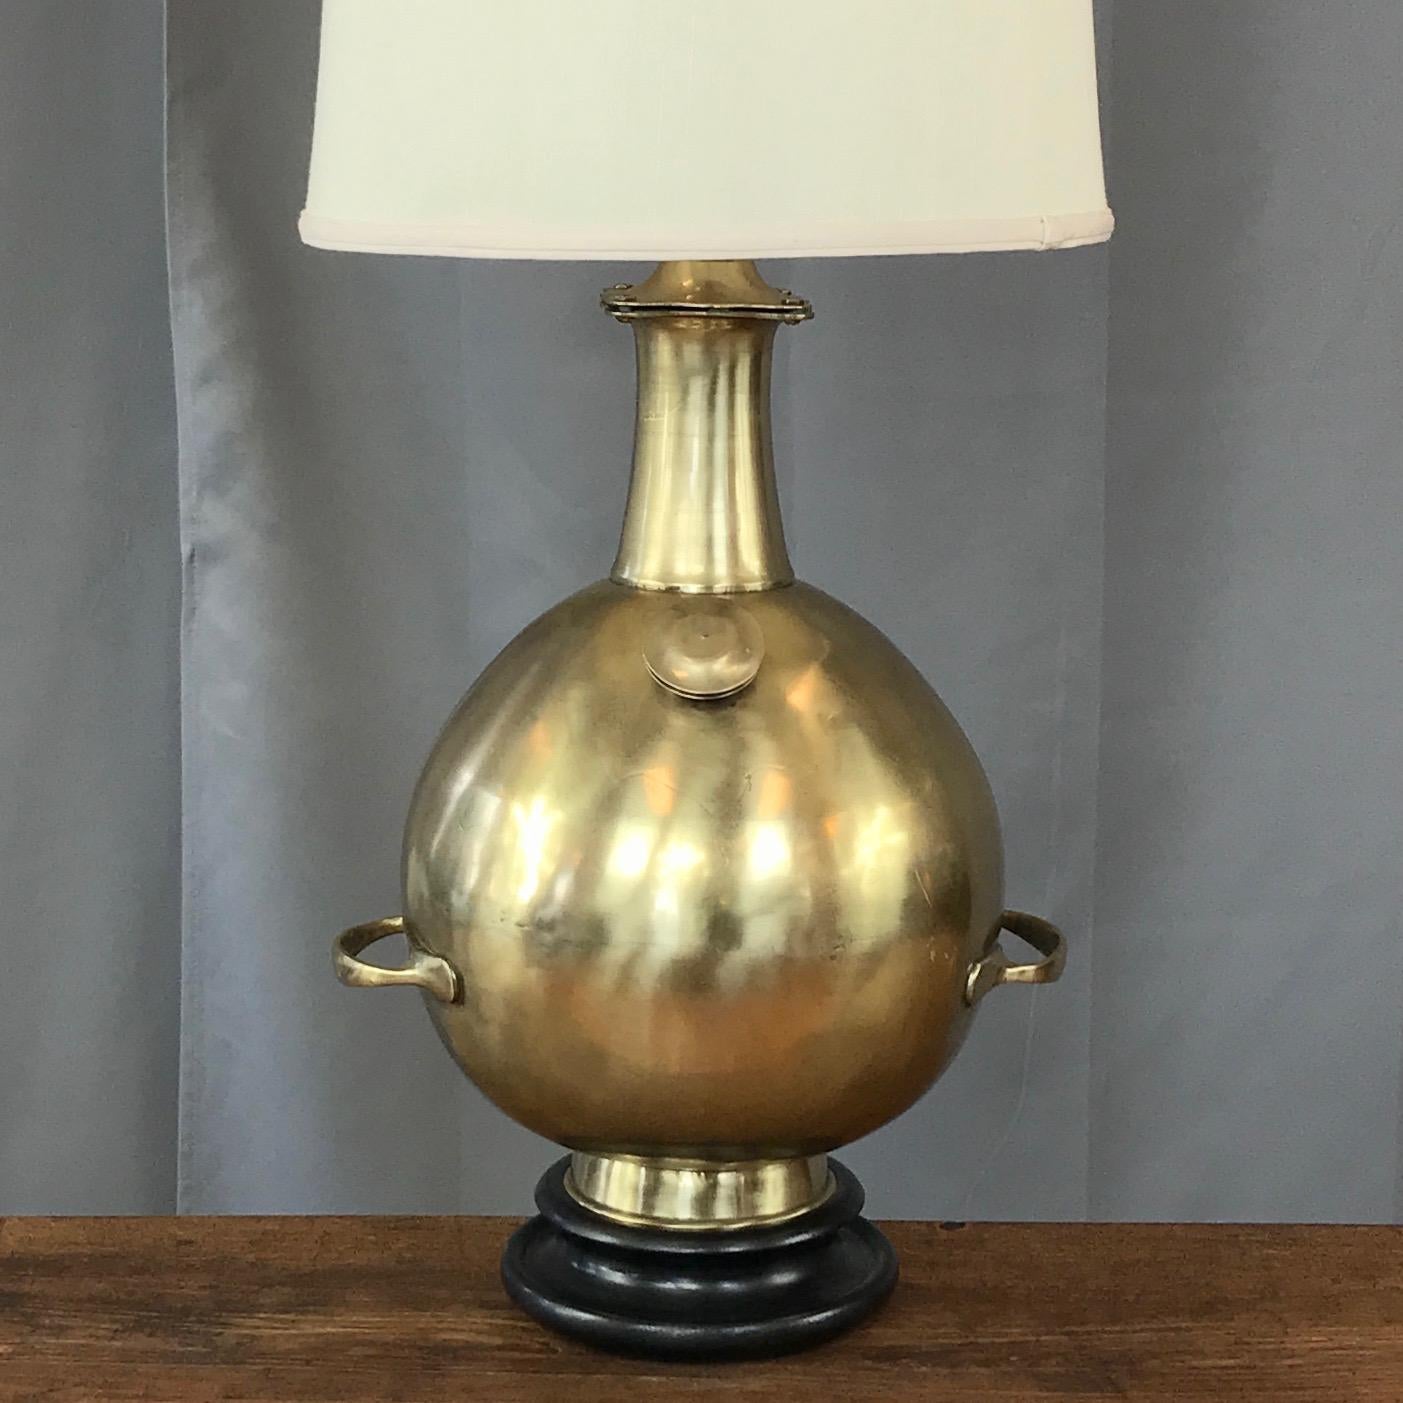 A monumental and uncommon Marbro Lamp Company brass table lamp on black wood base.

Substantial gleaming solid brass body features interesting Machine Age-type design details that evoke an antique diving bell or pressure cooker. Black lacquered